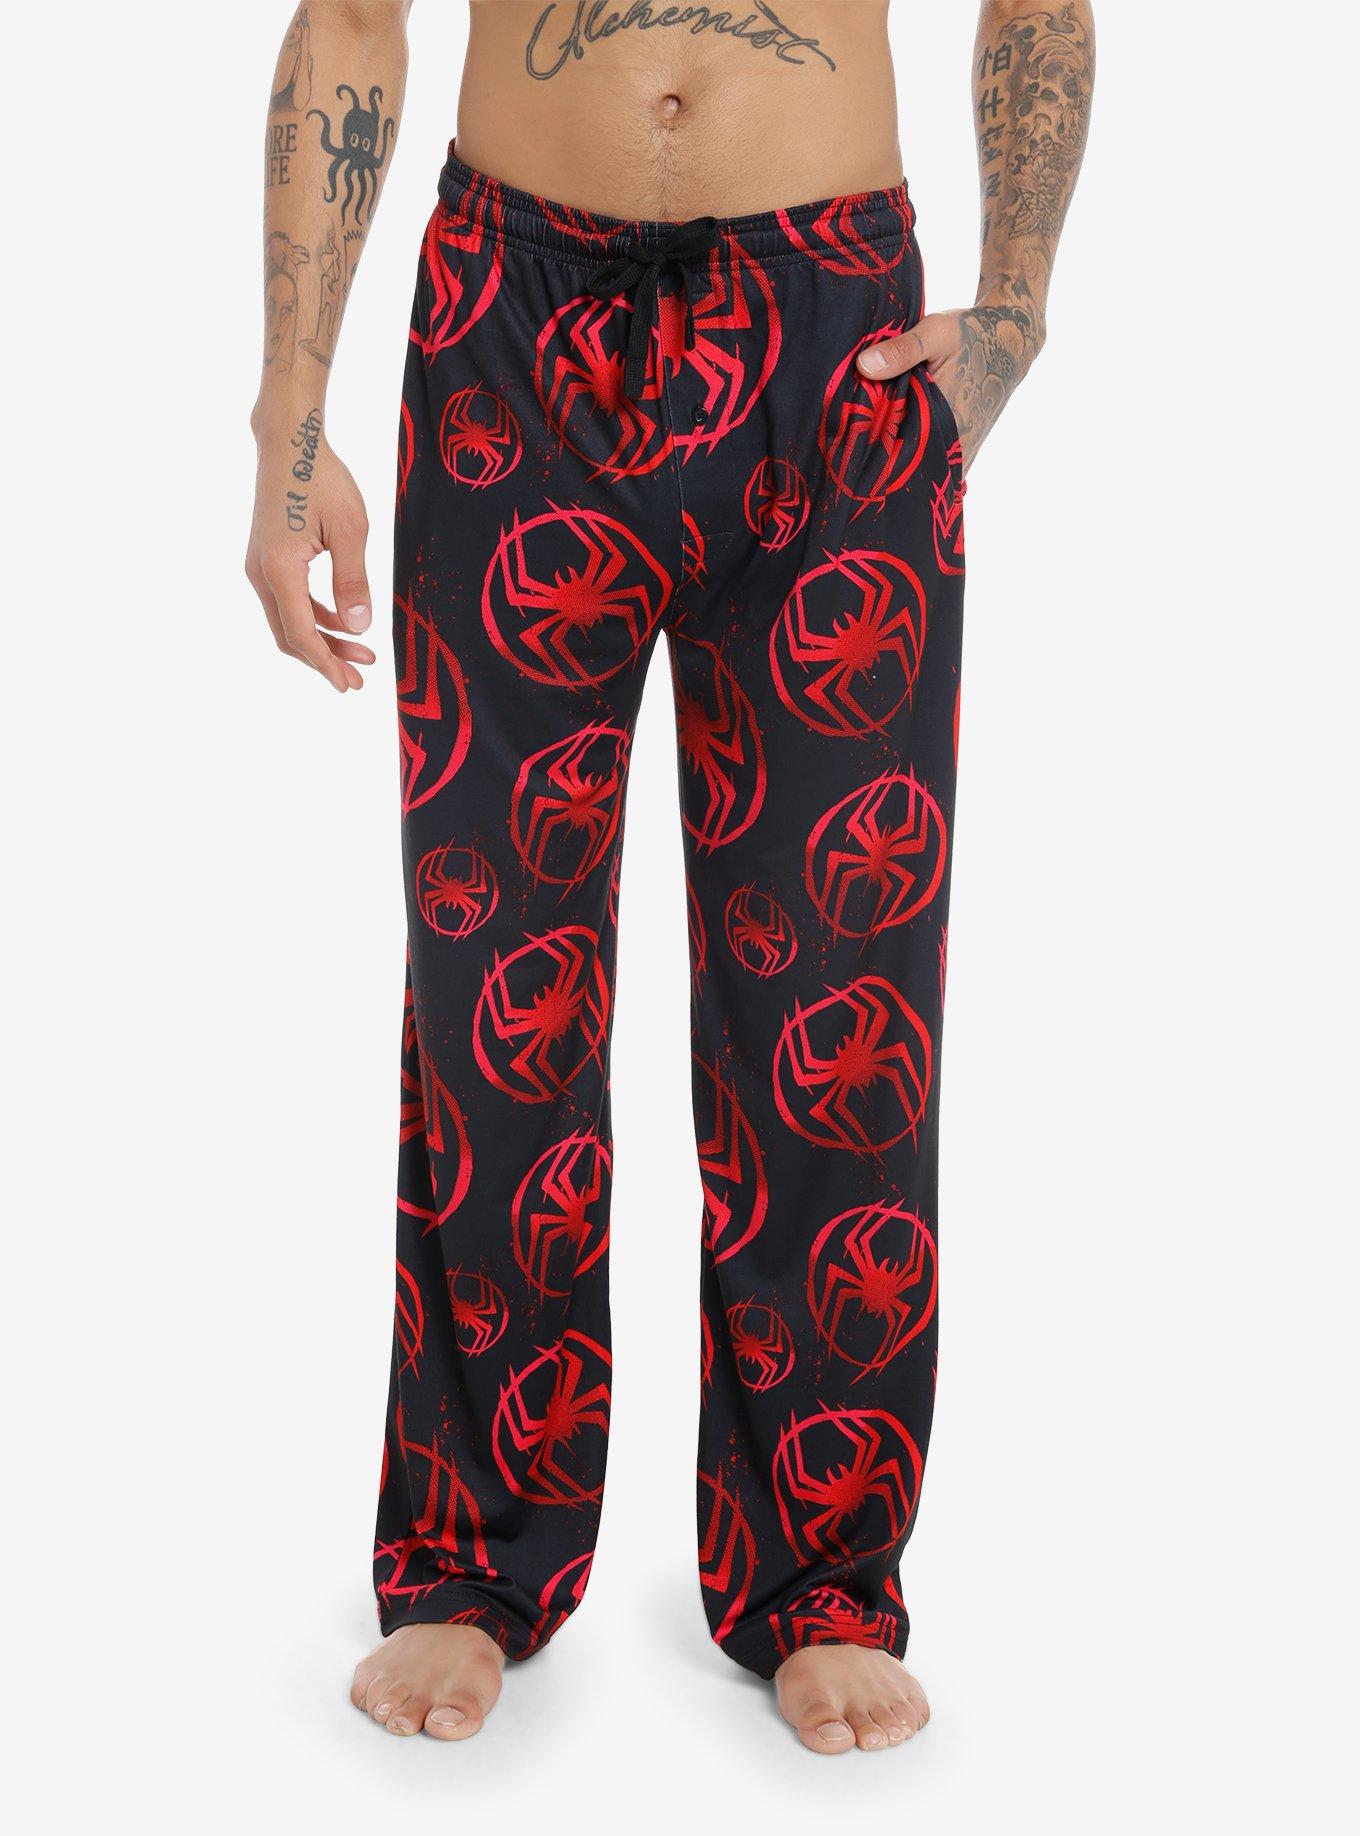 Marvel Men's Washed Graphic Jogger Pants, Sizes S-3X